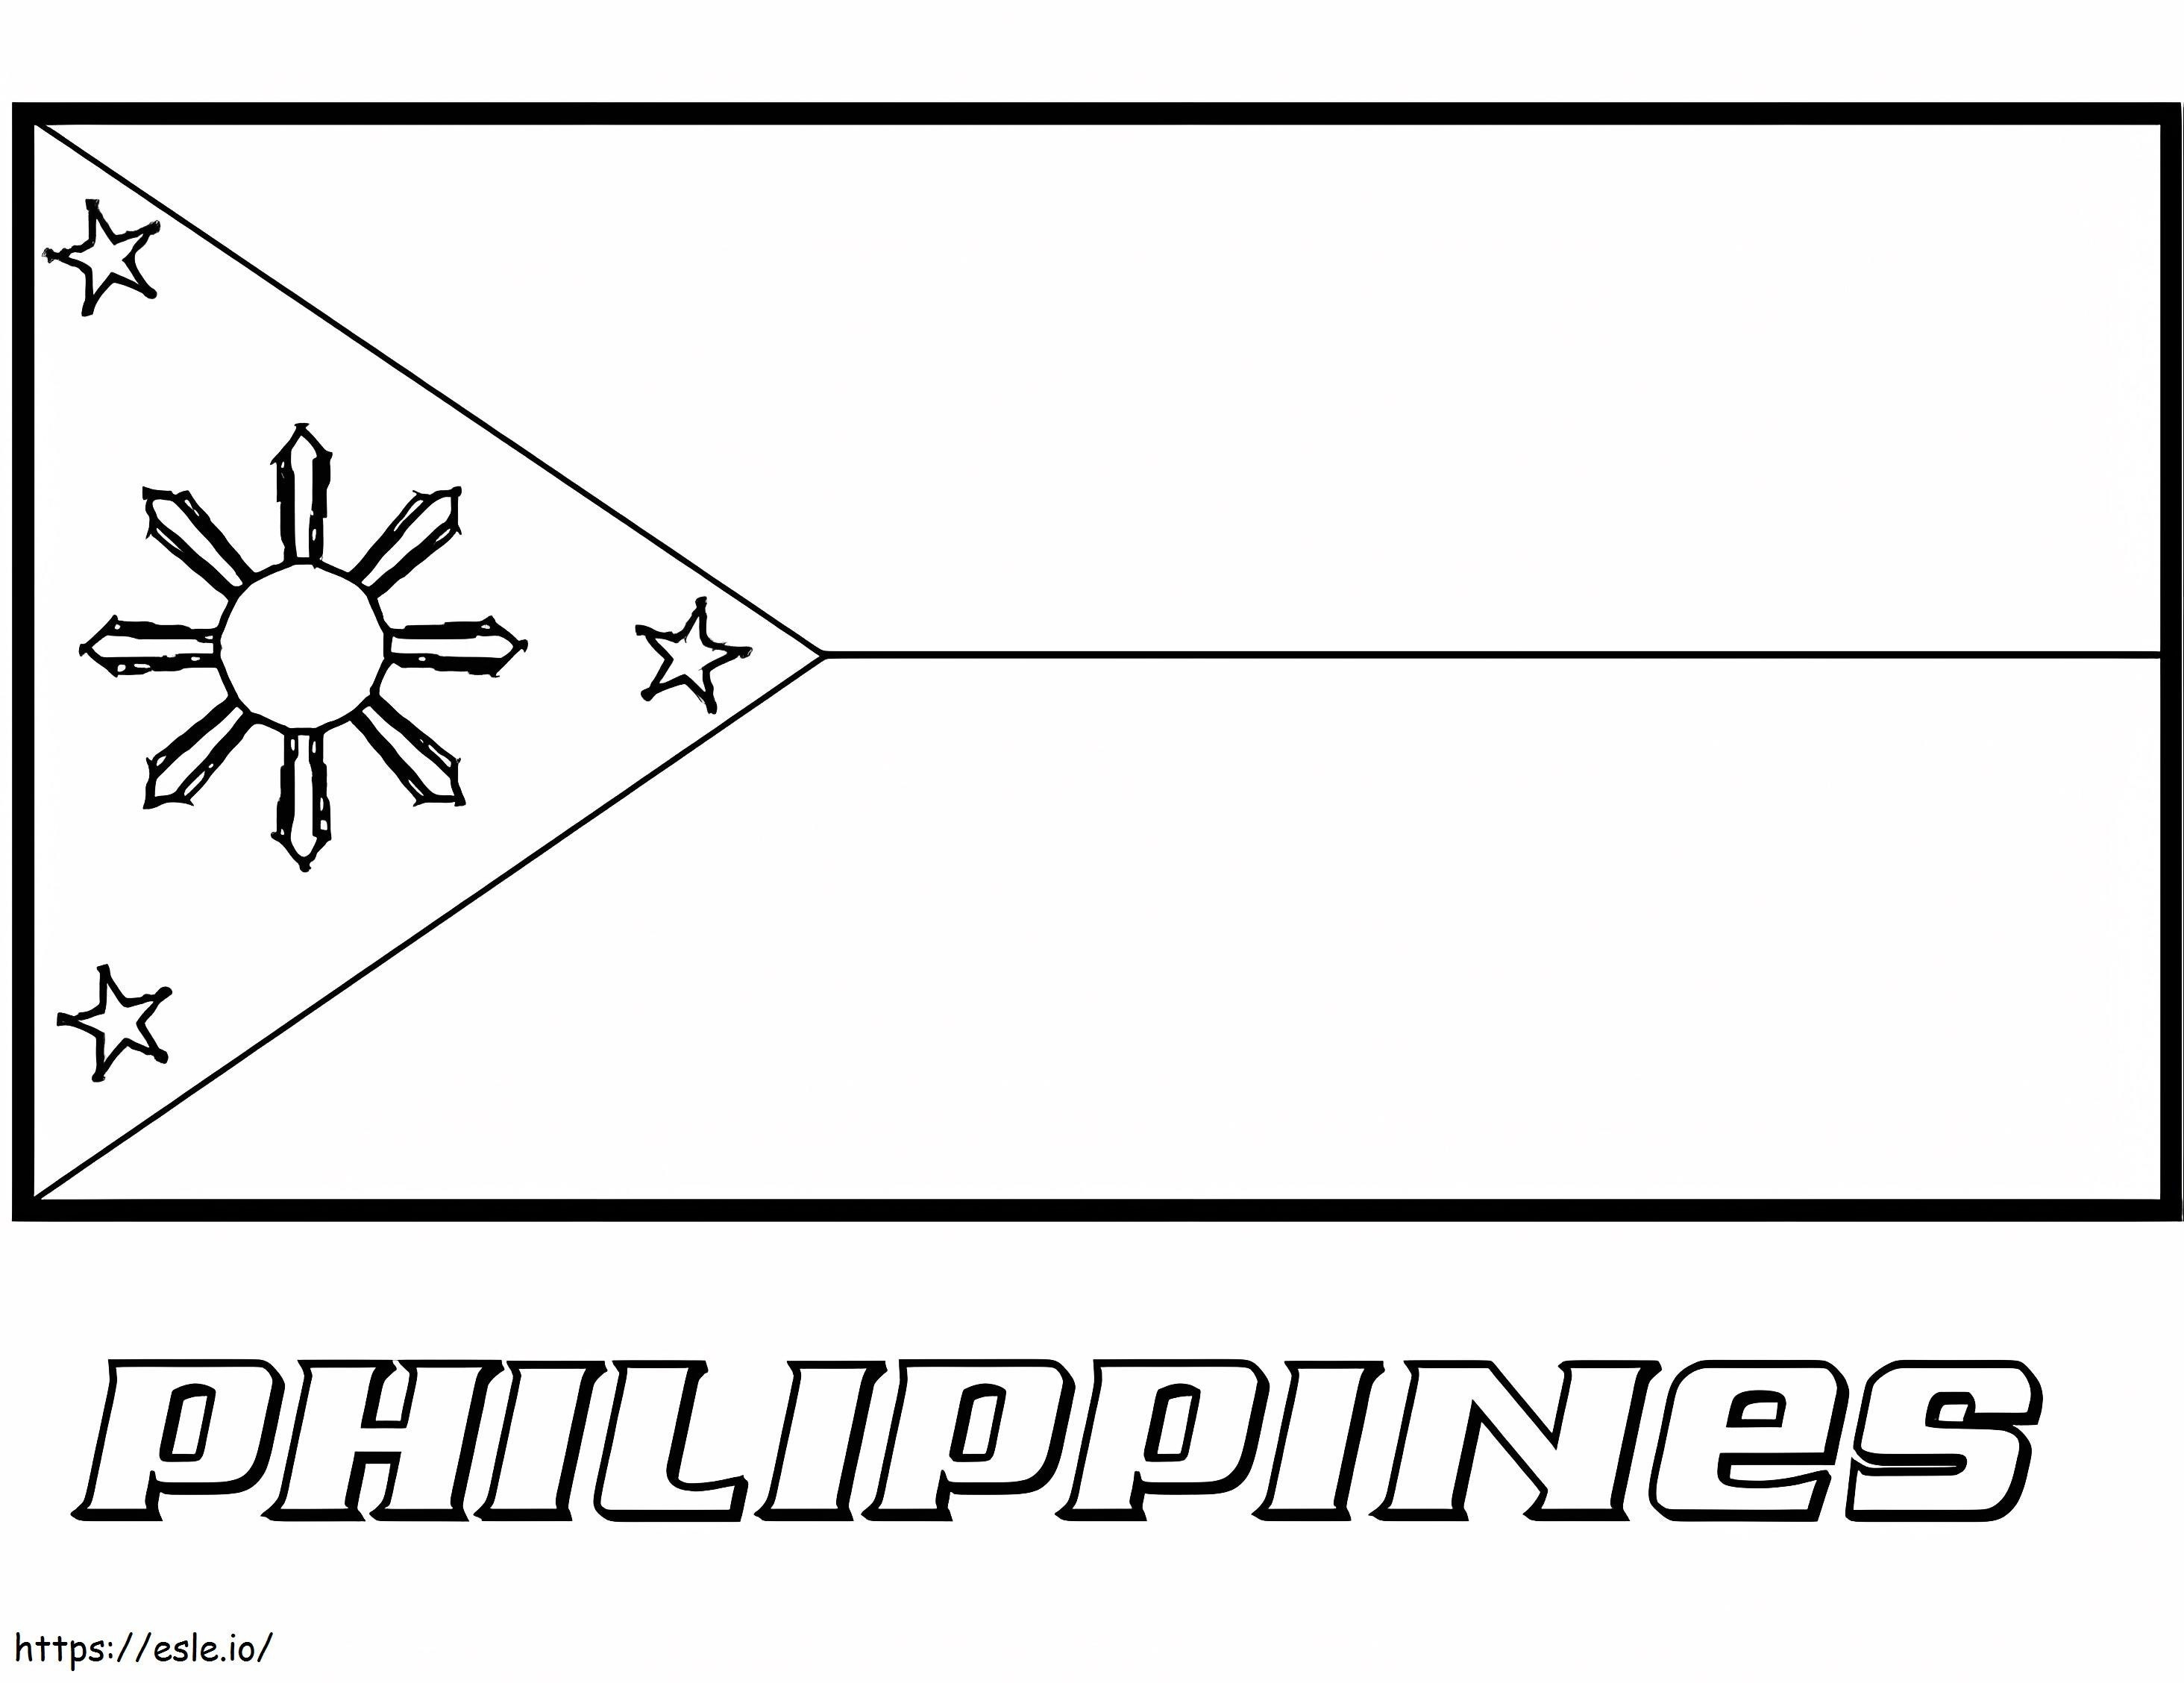 Philippiness Flag coloring page